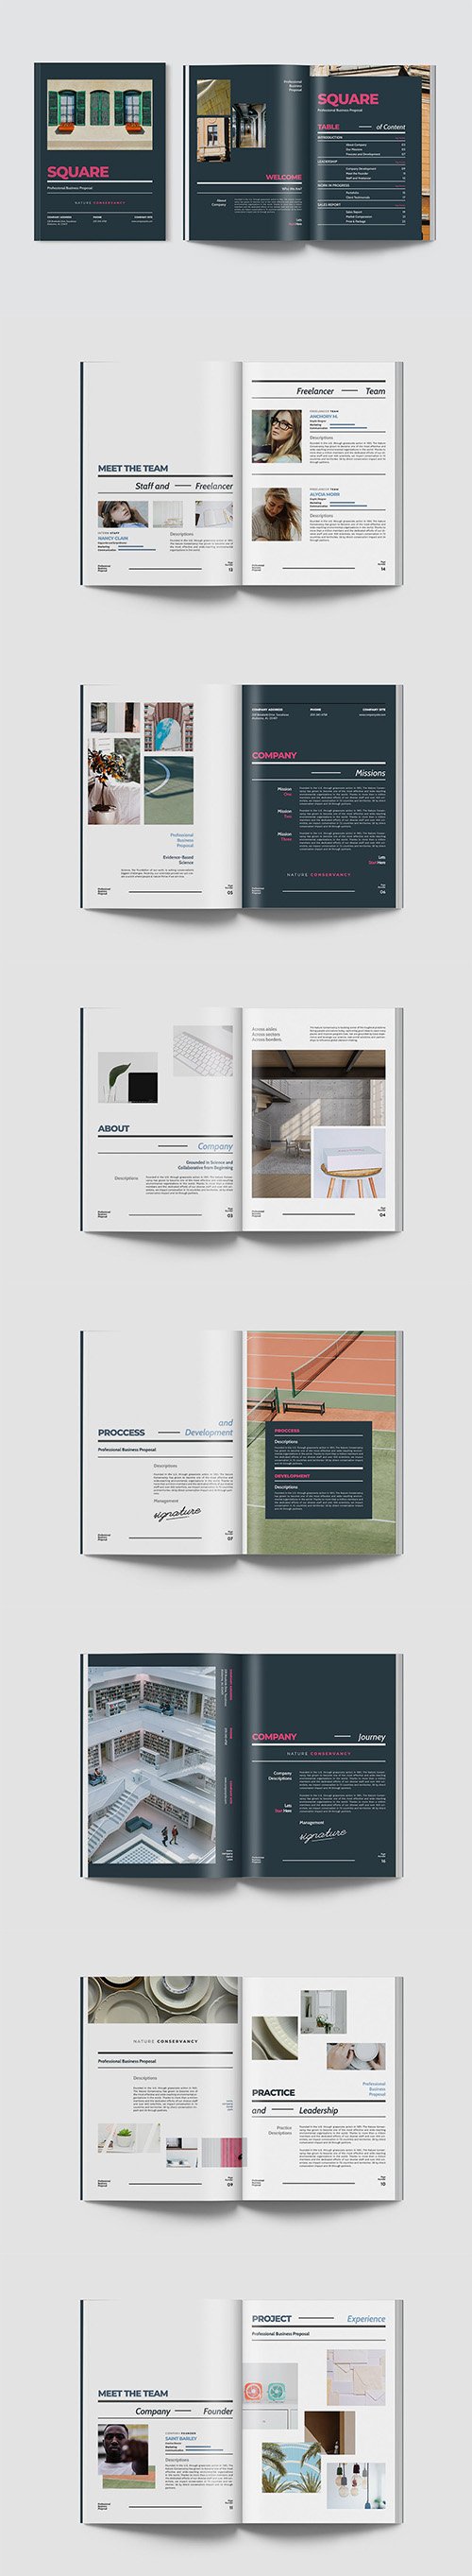 Square - Professional Business Proposal Indesign